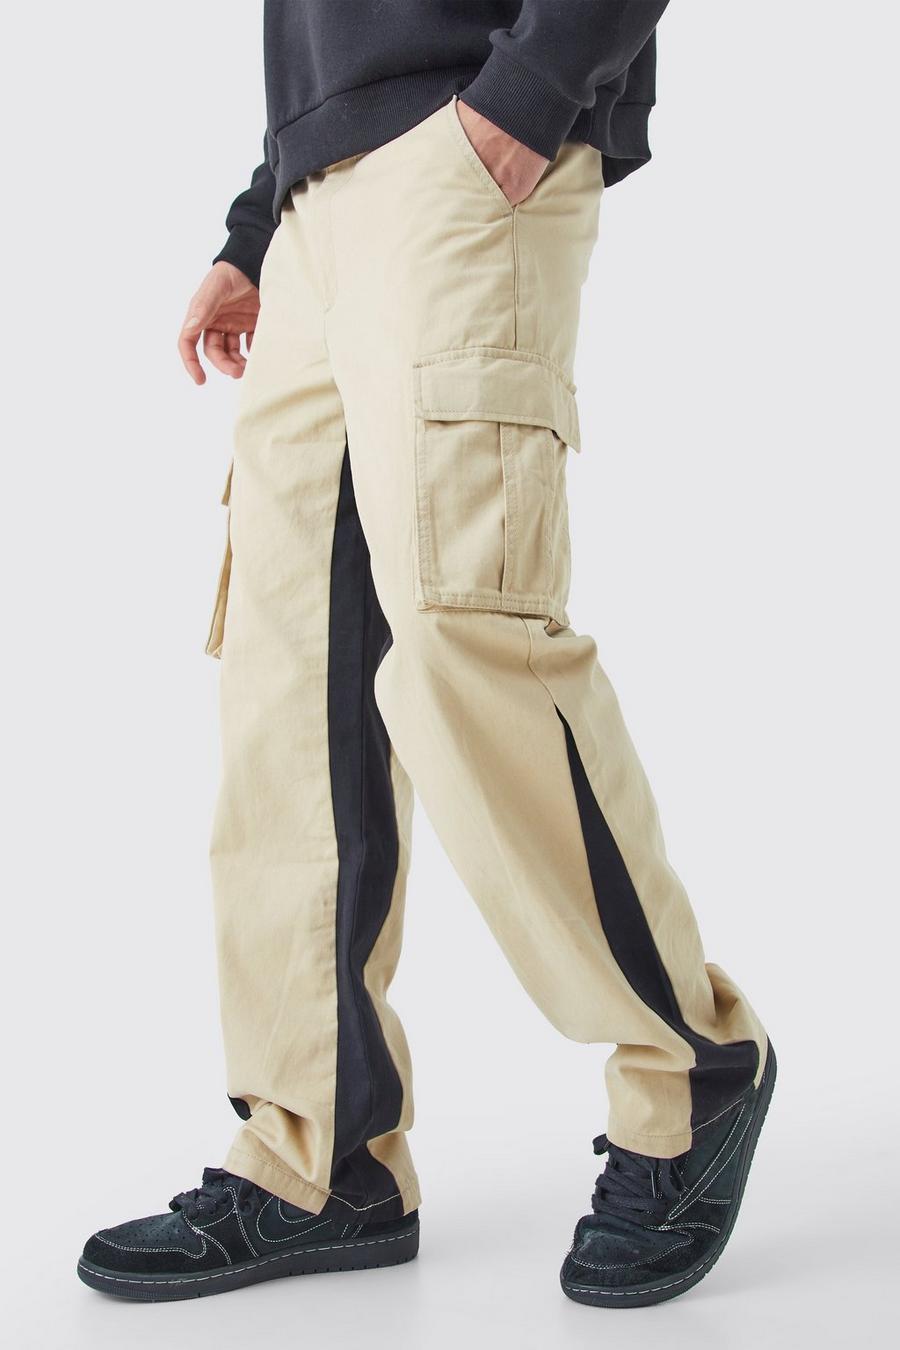 Mens Smart Casual Beige Leather Trousers Jeans Pants